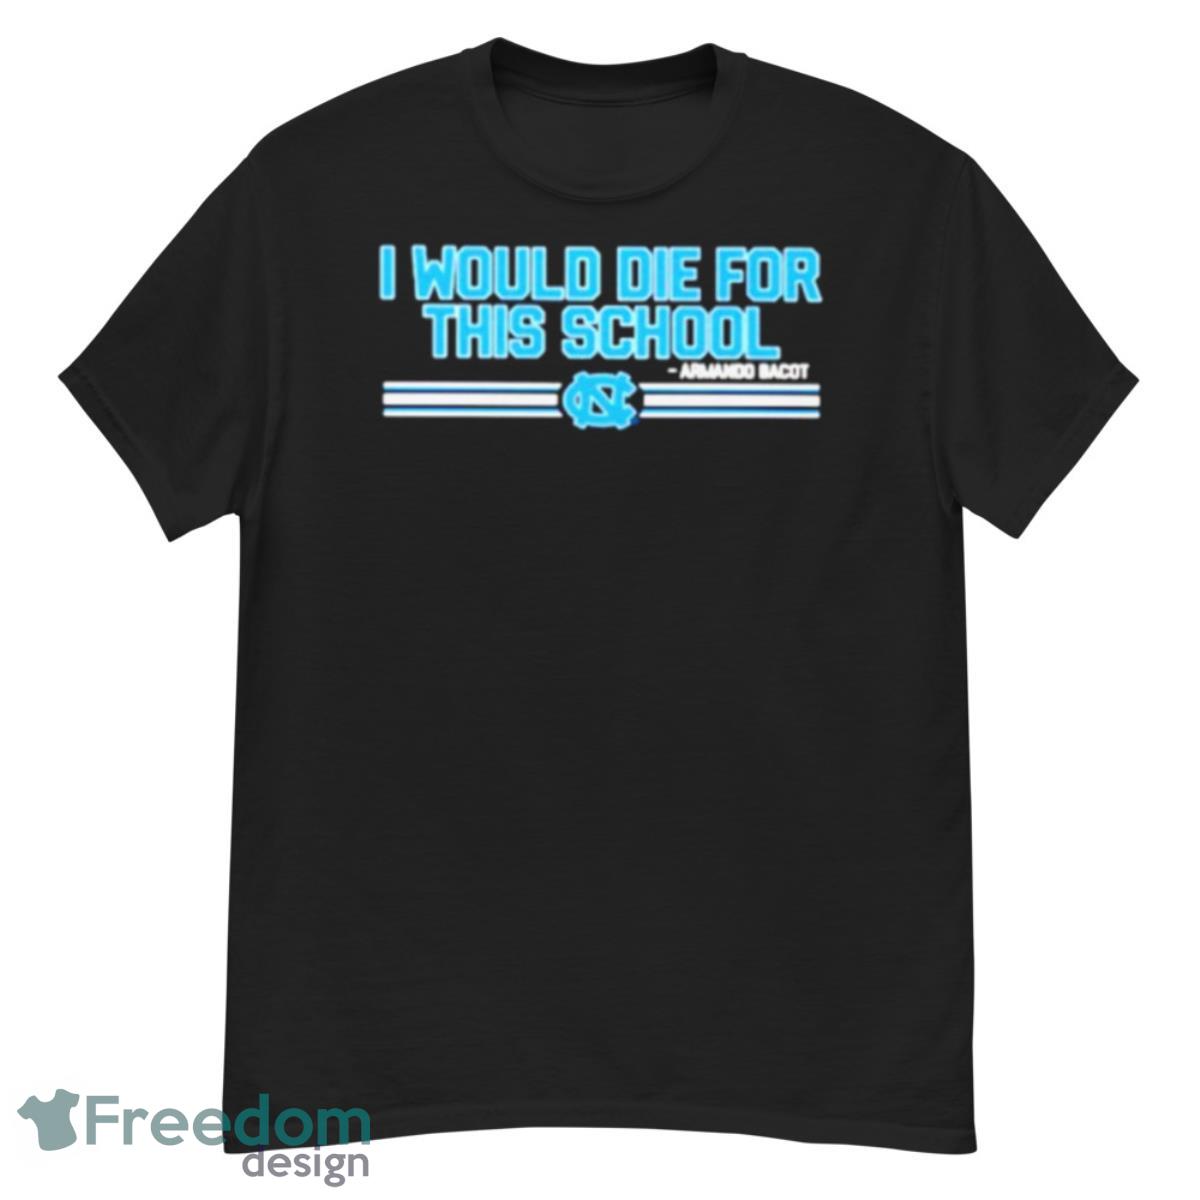 I would die for this school Armando Bacot Shirt - G500 Men’s Classic T-Shirt